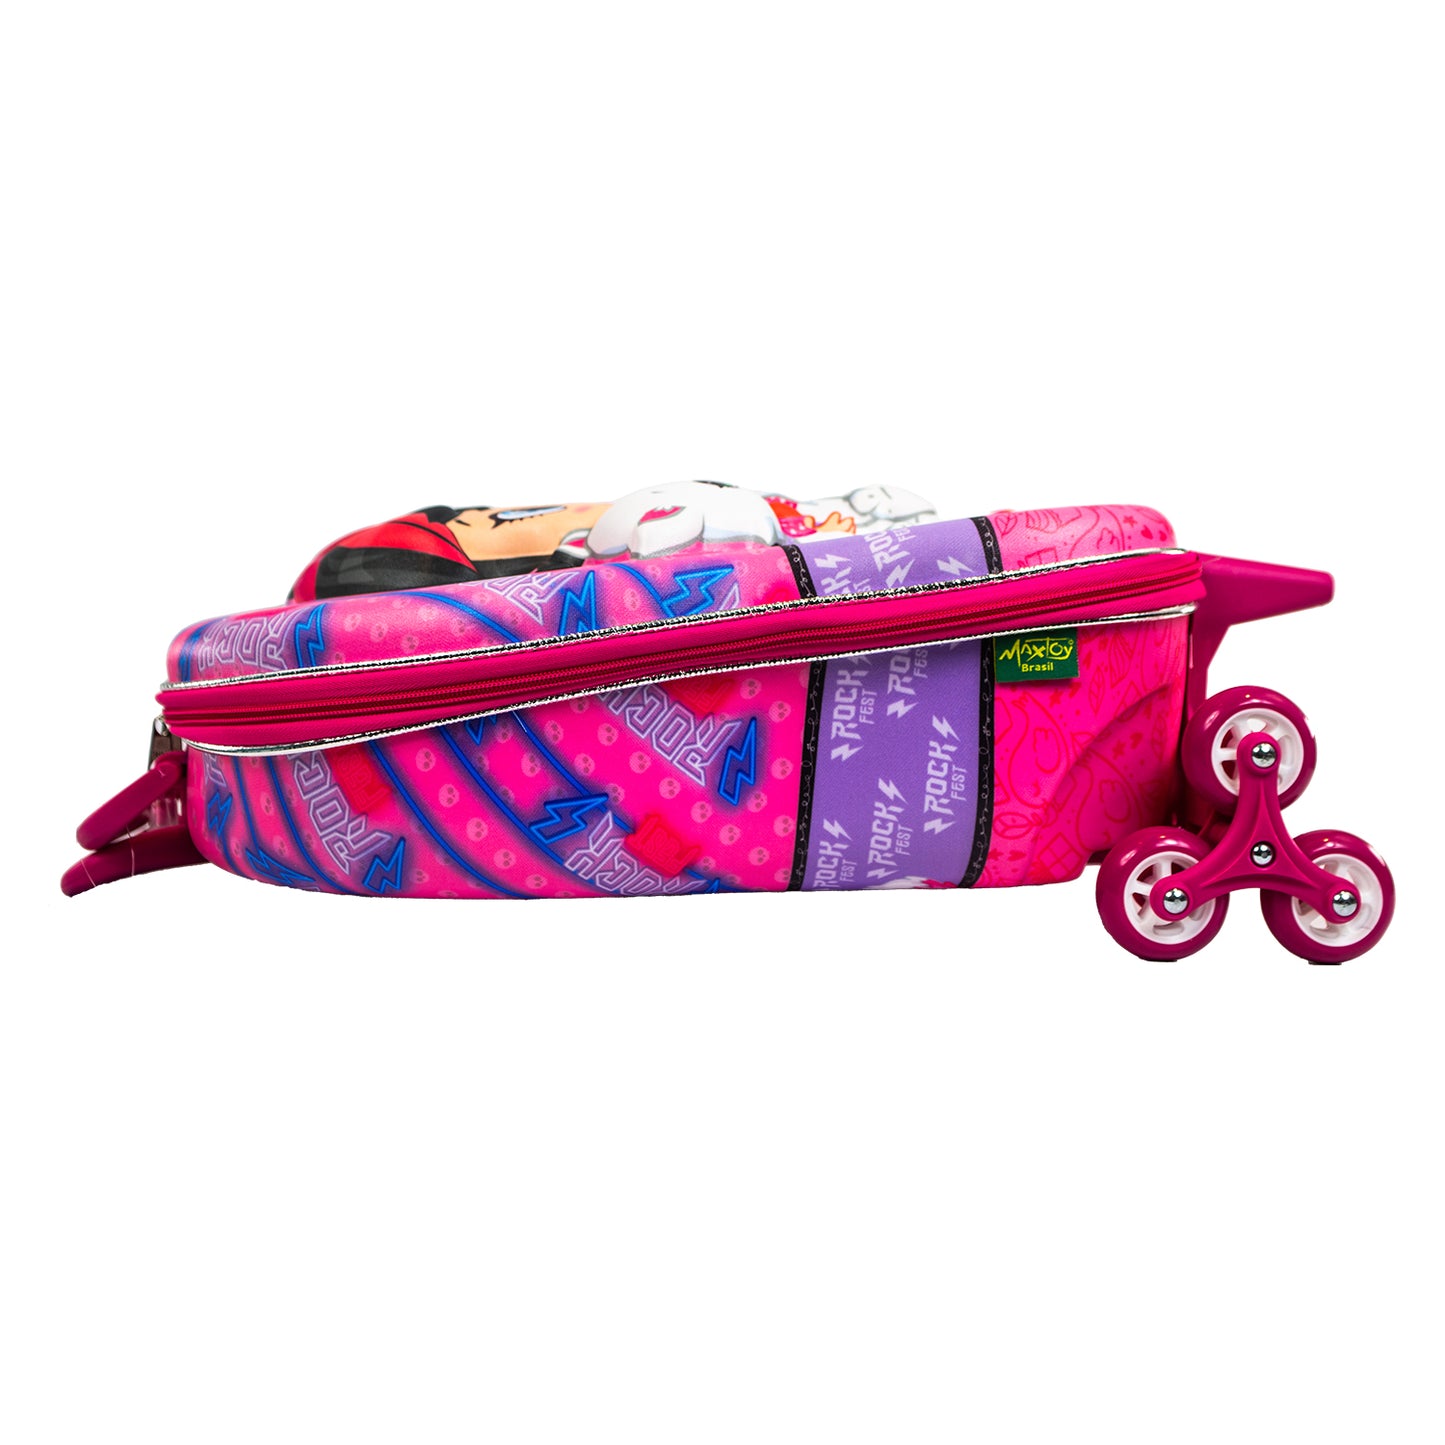 Baby Star Suitcase - Pink and Purple